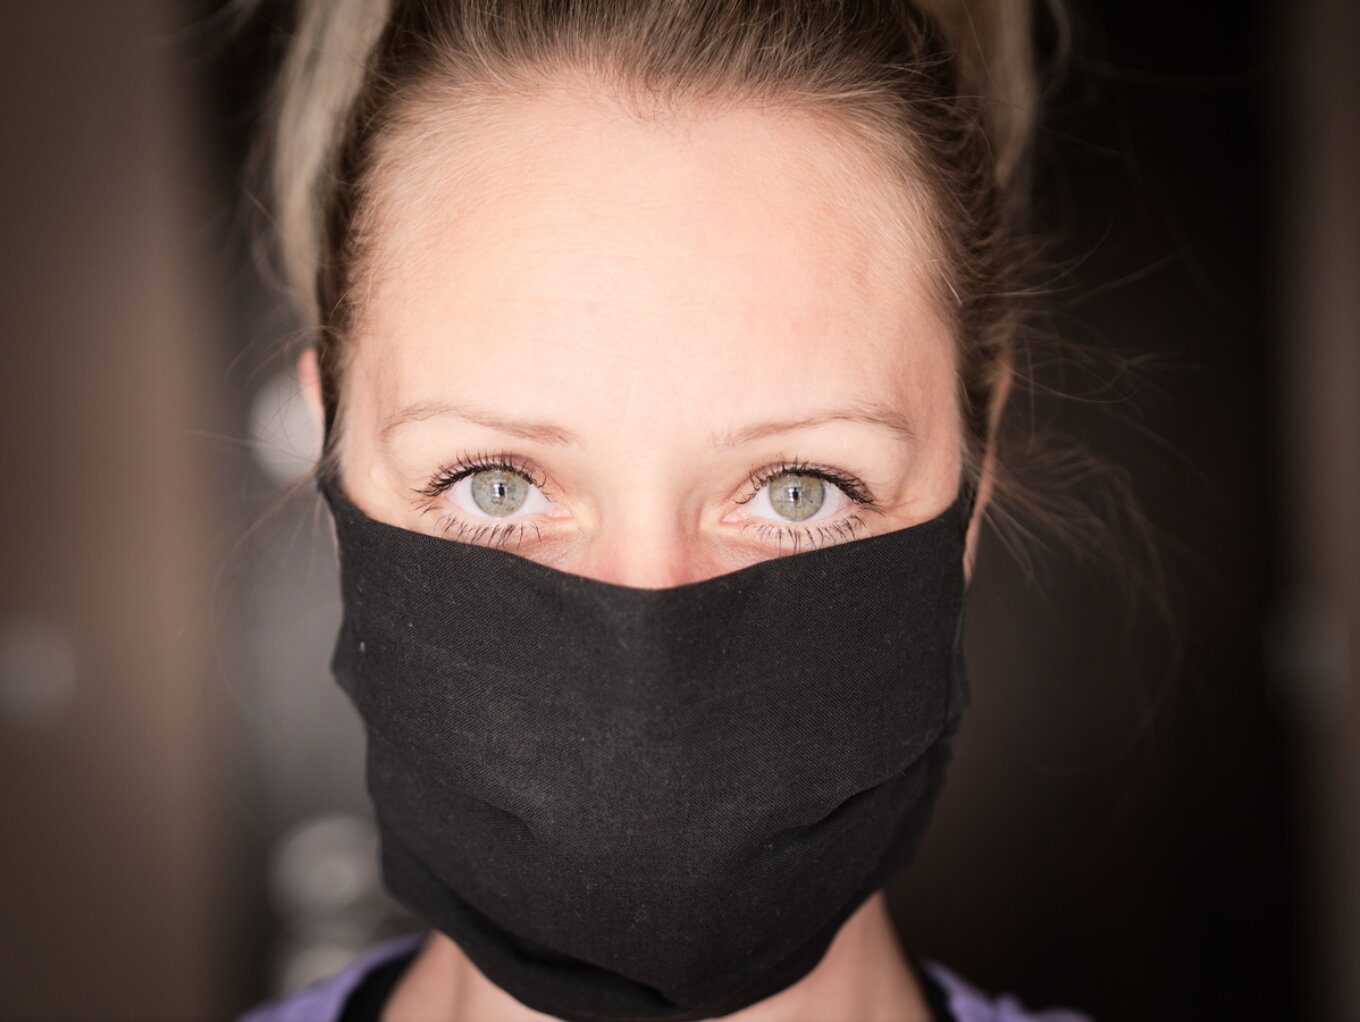 A woman looking into the camera wearing a black face mask